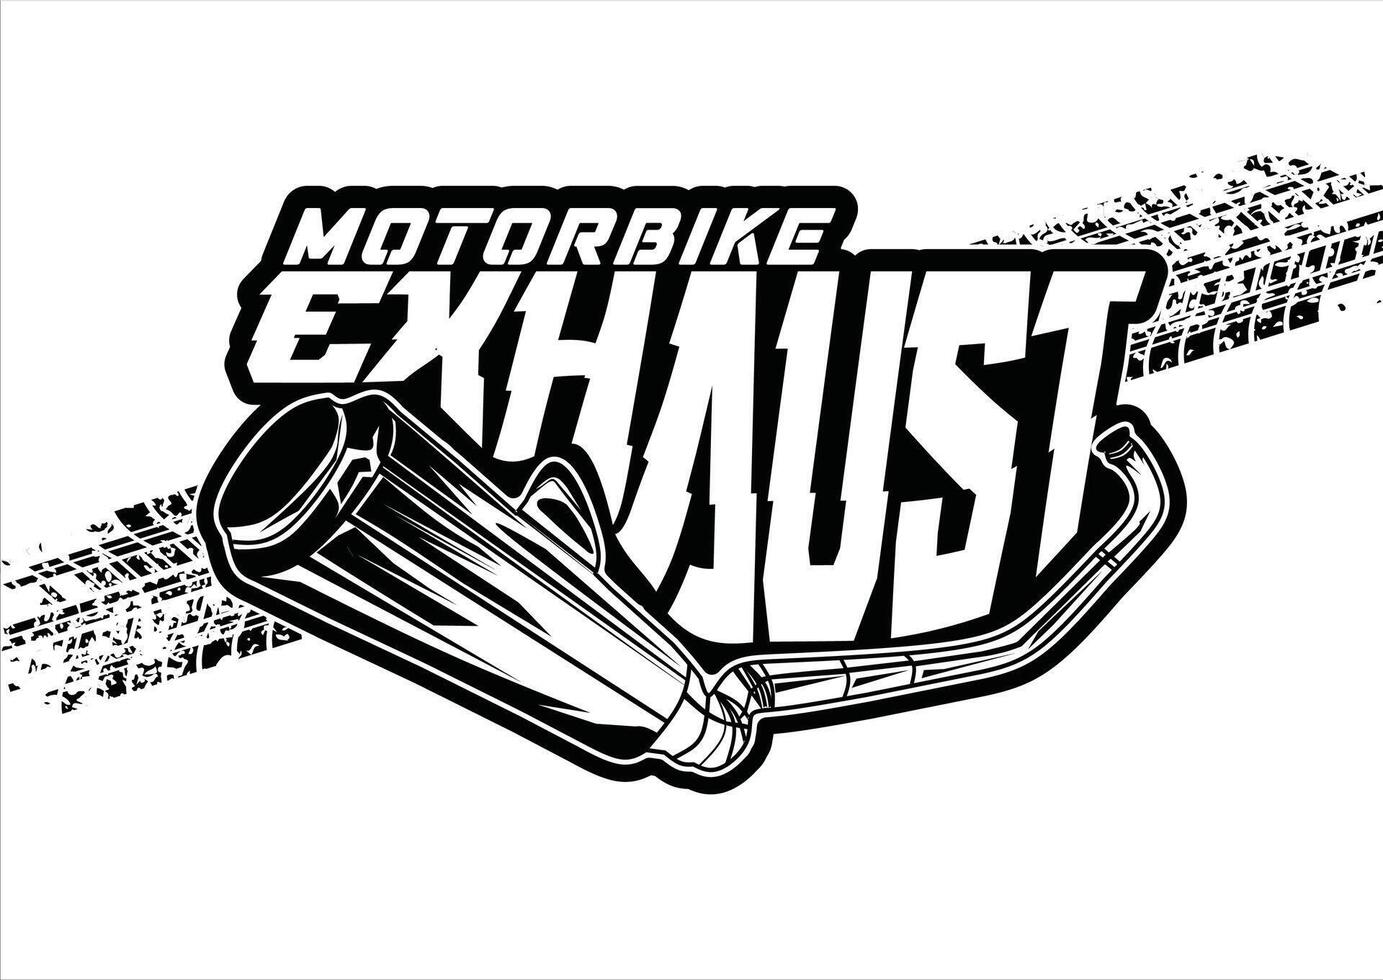 Motorbike exhaust trendy fashionable vector t-shirt and apparel design